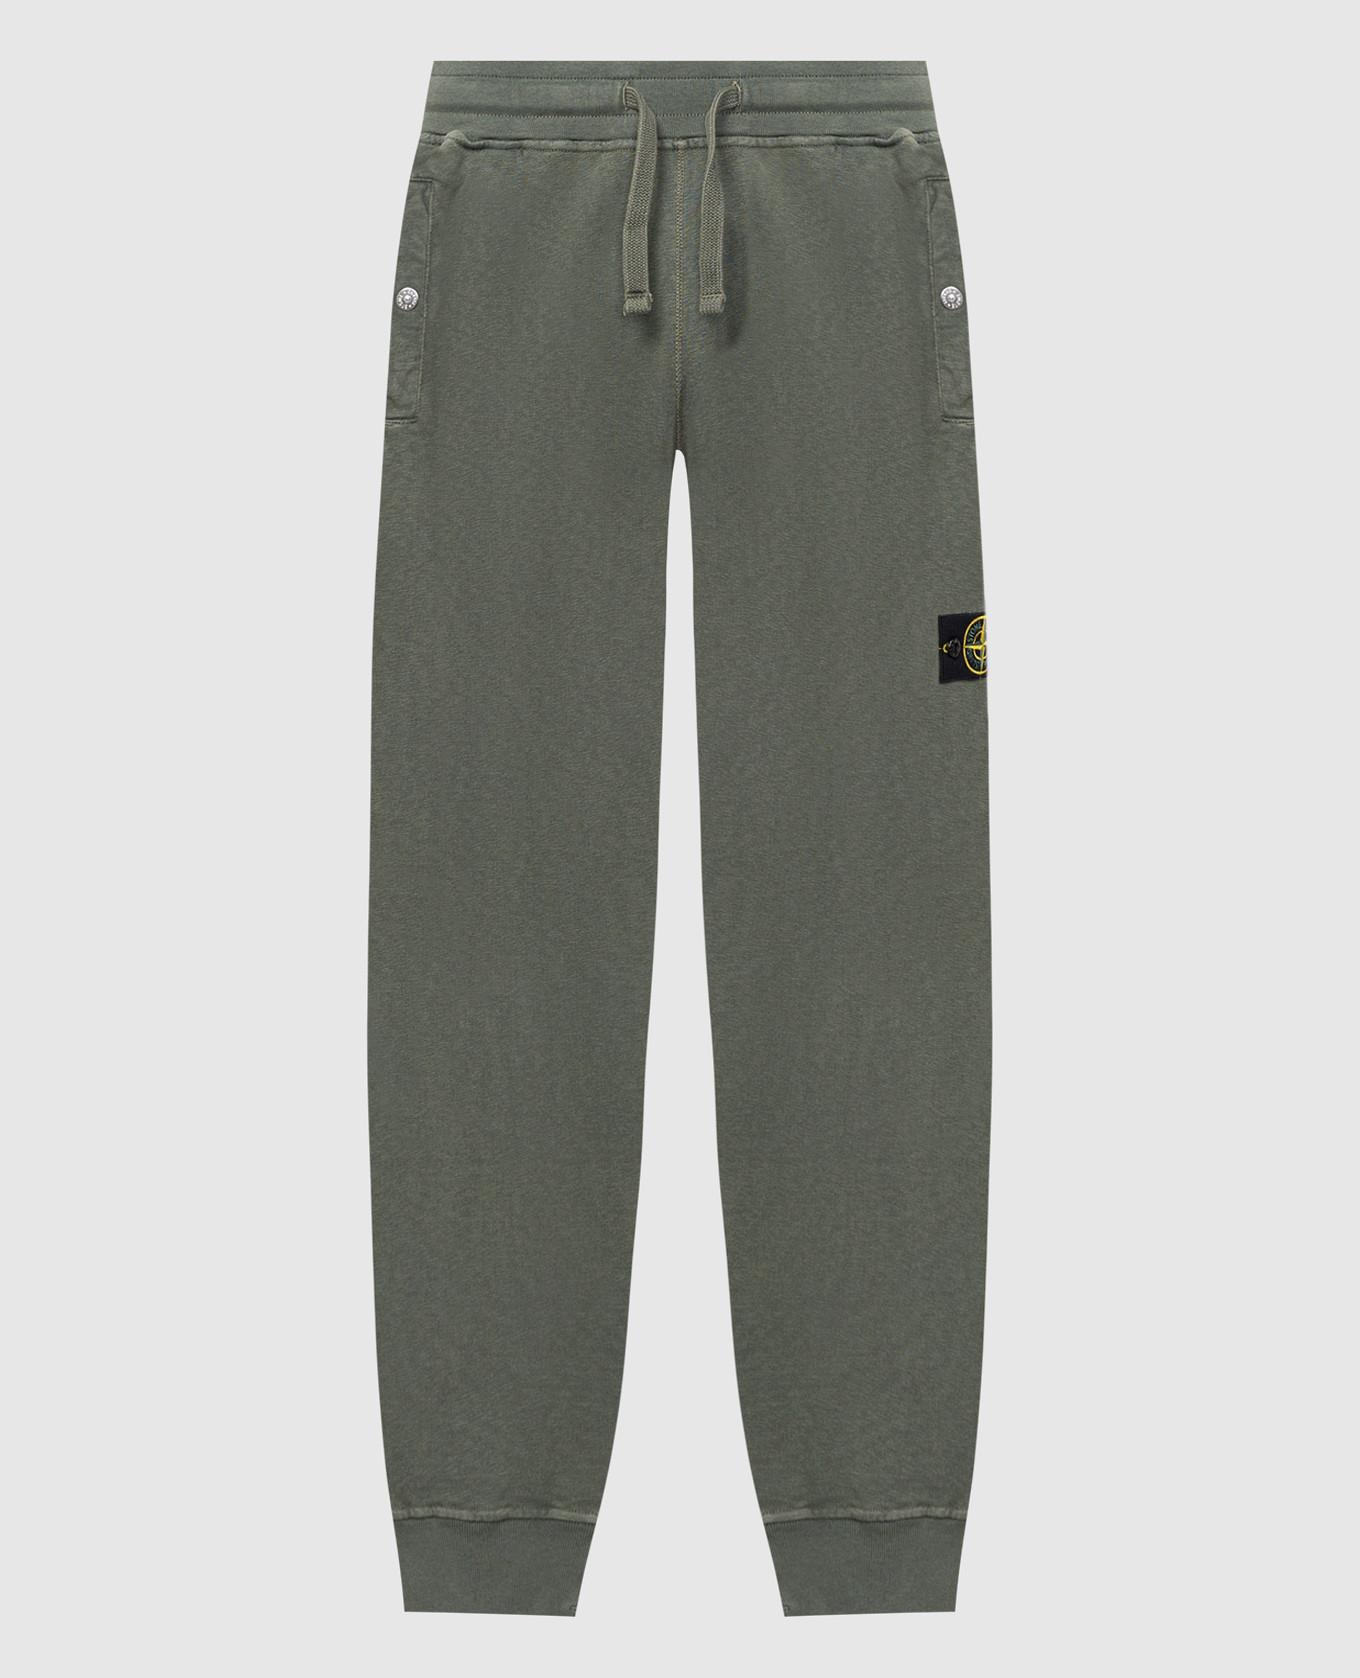 Green joggers with removable logo patch